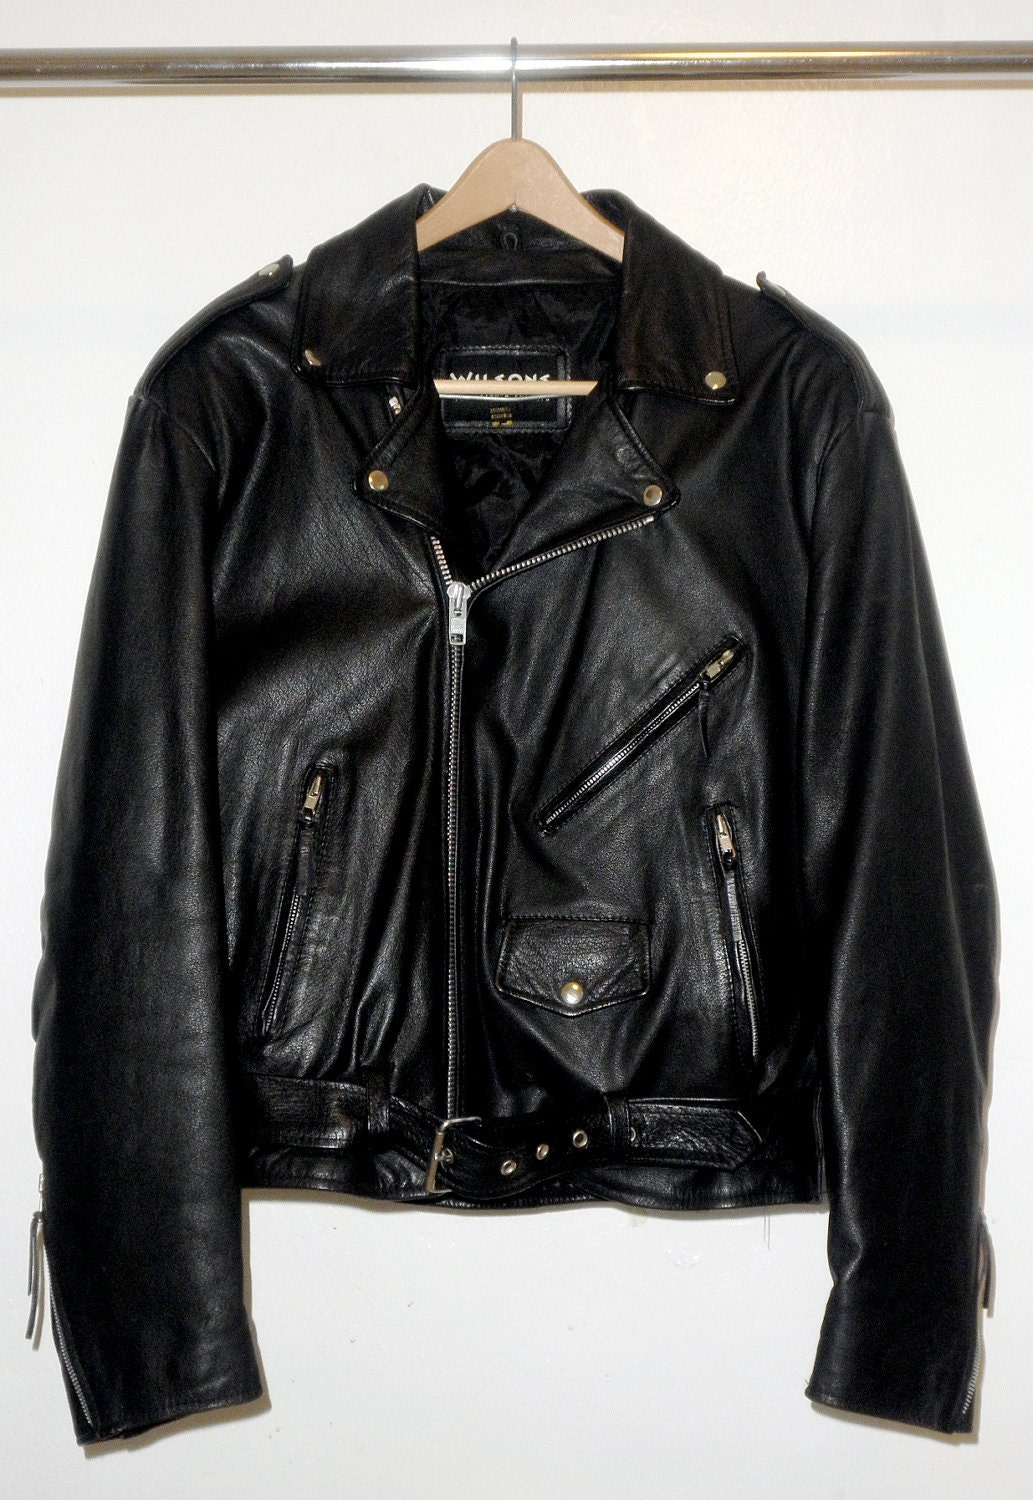 Men's Black Leather Motorcycle Jacket by Wilsons Leather